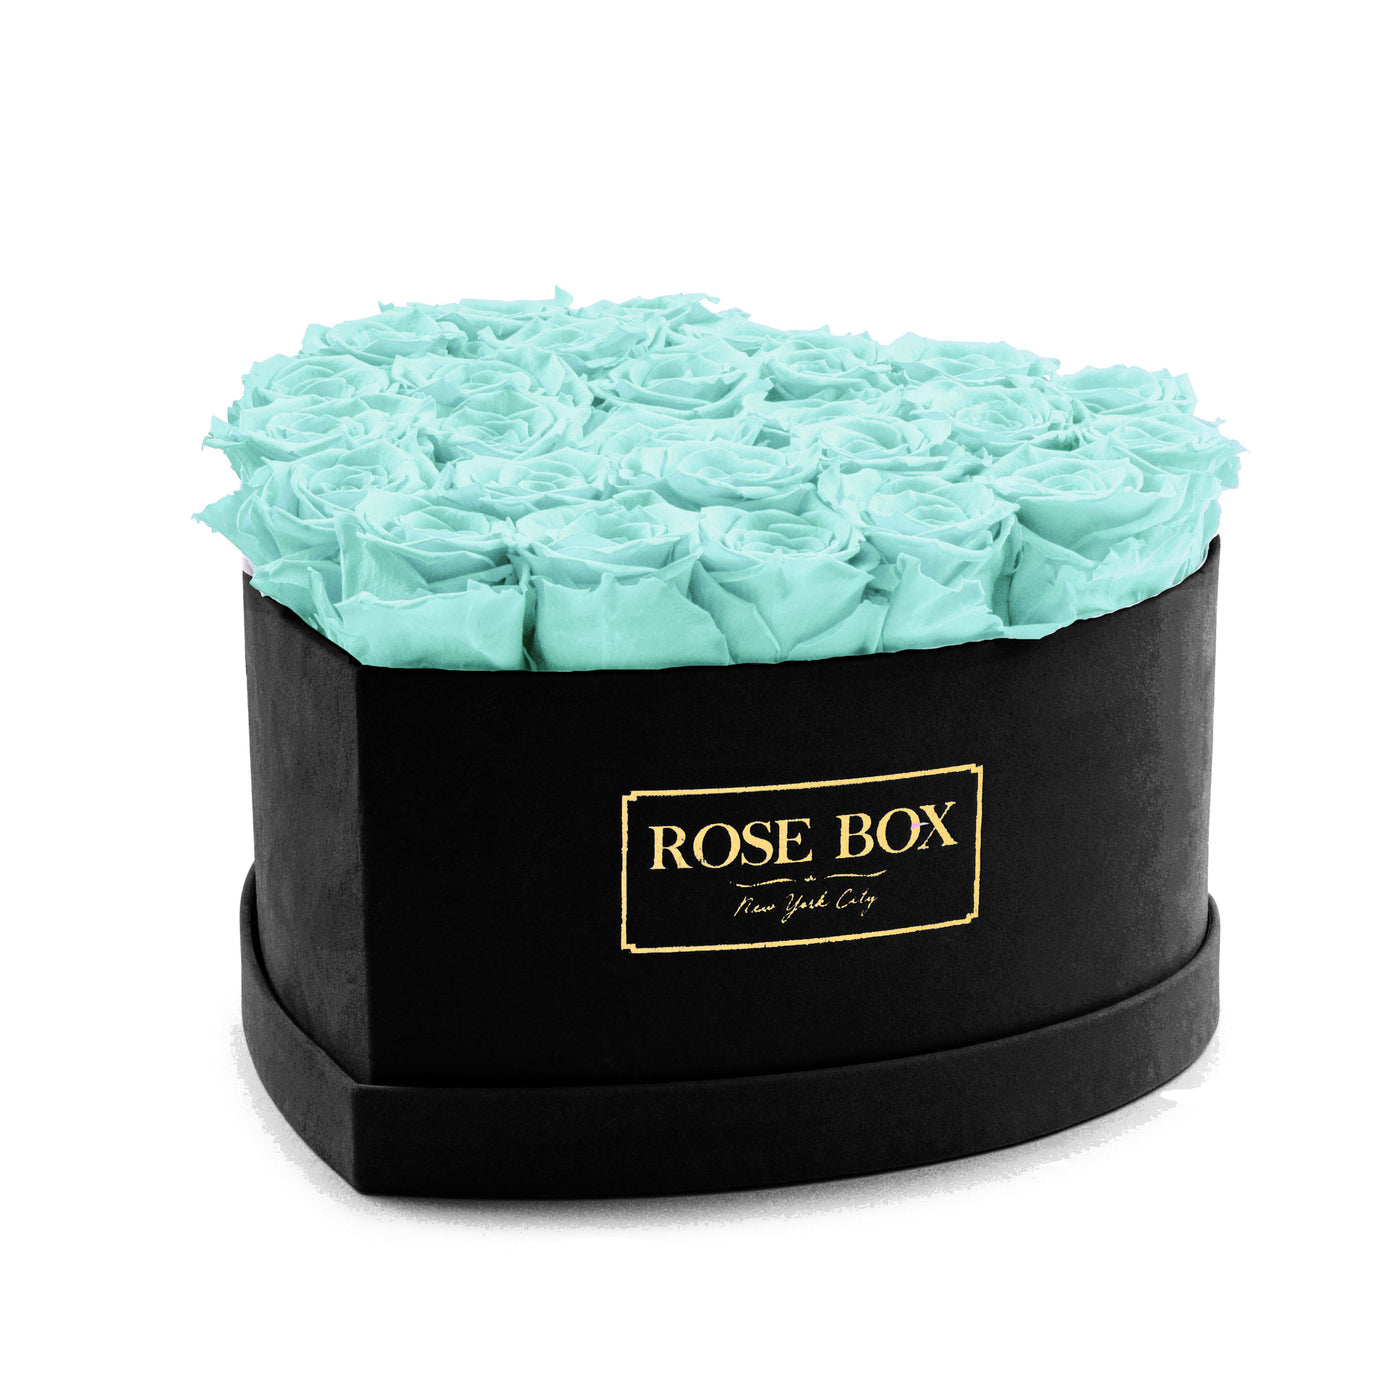 Large Black Heart Box with Icy Mint Roses